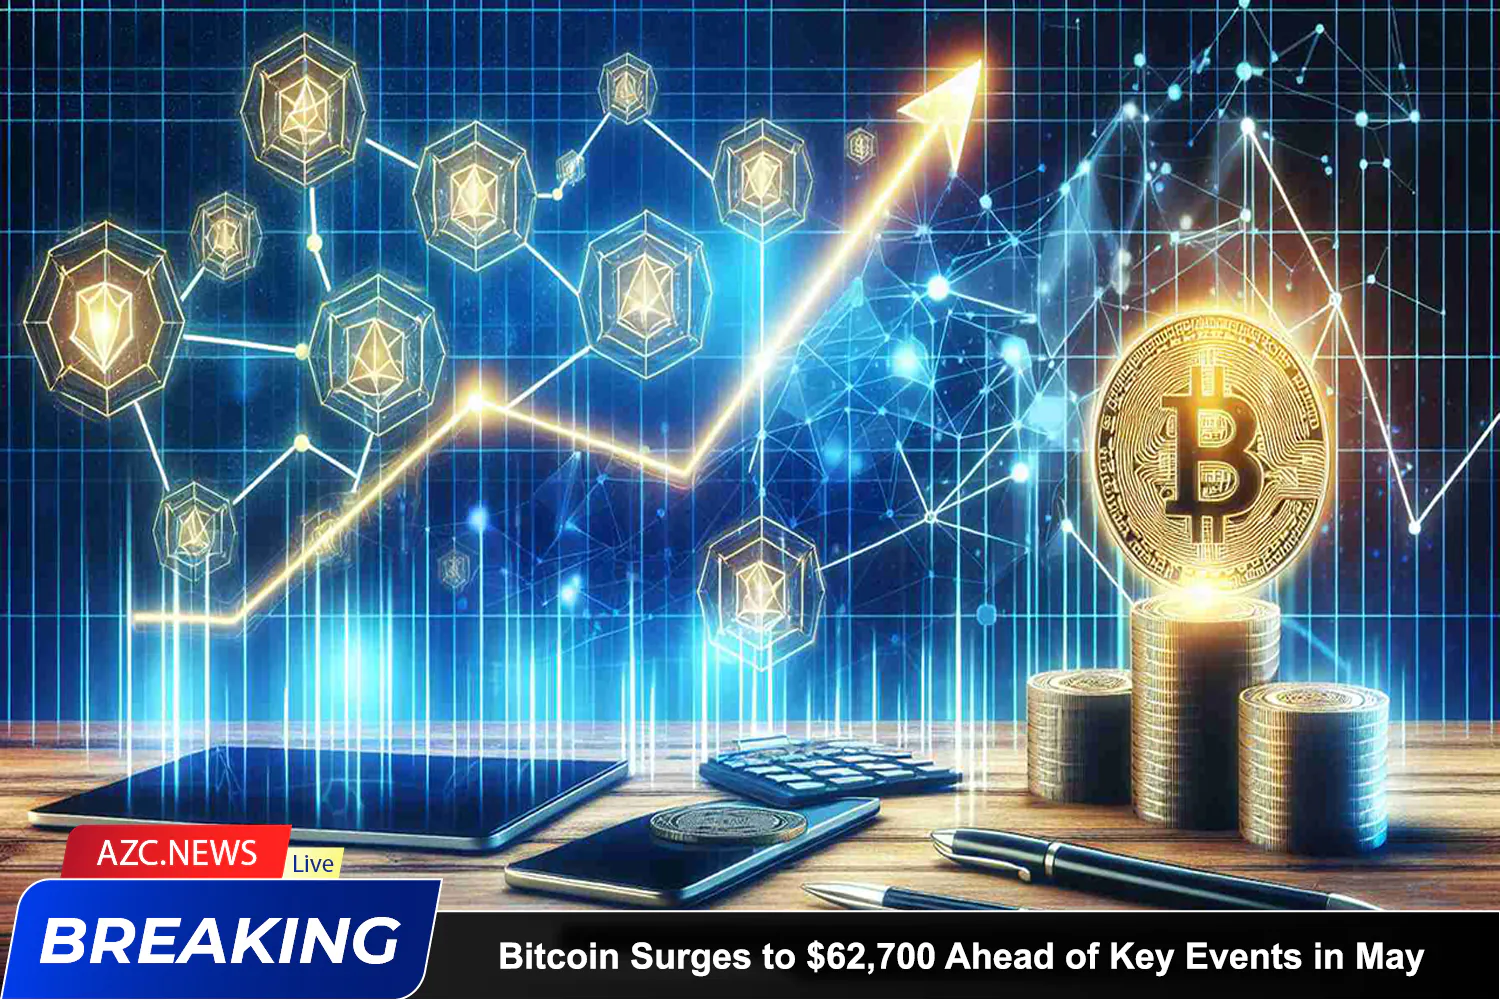 Azcnews Bitcoin Surges To $62,700 Ahead Of Key Events In May